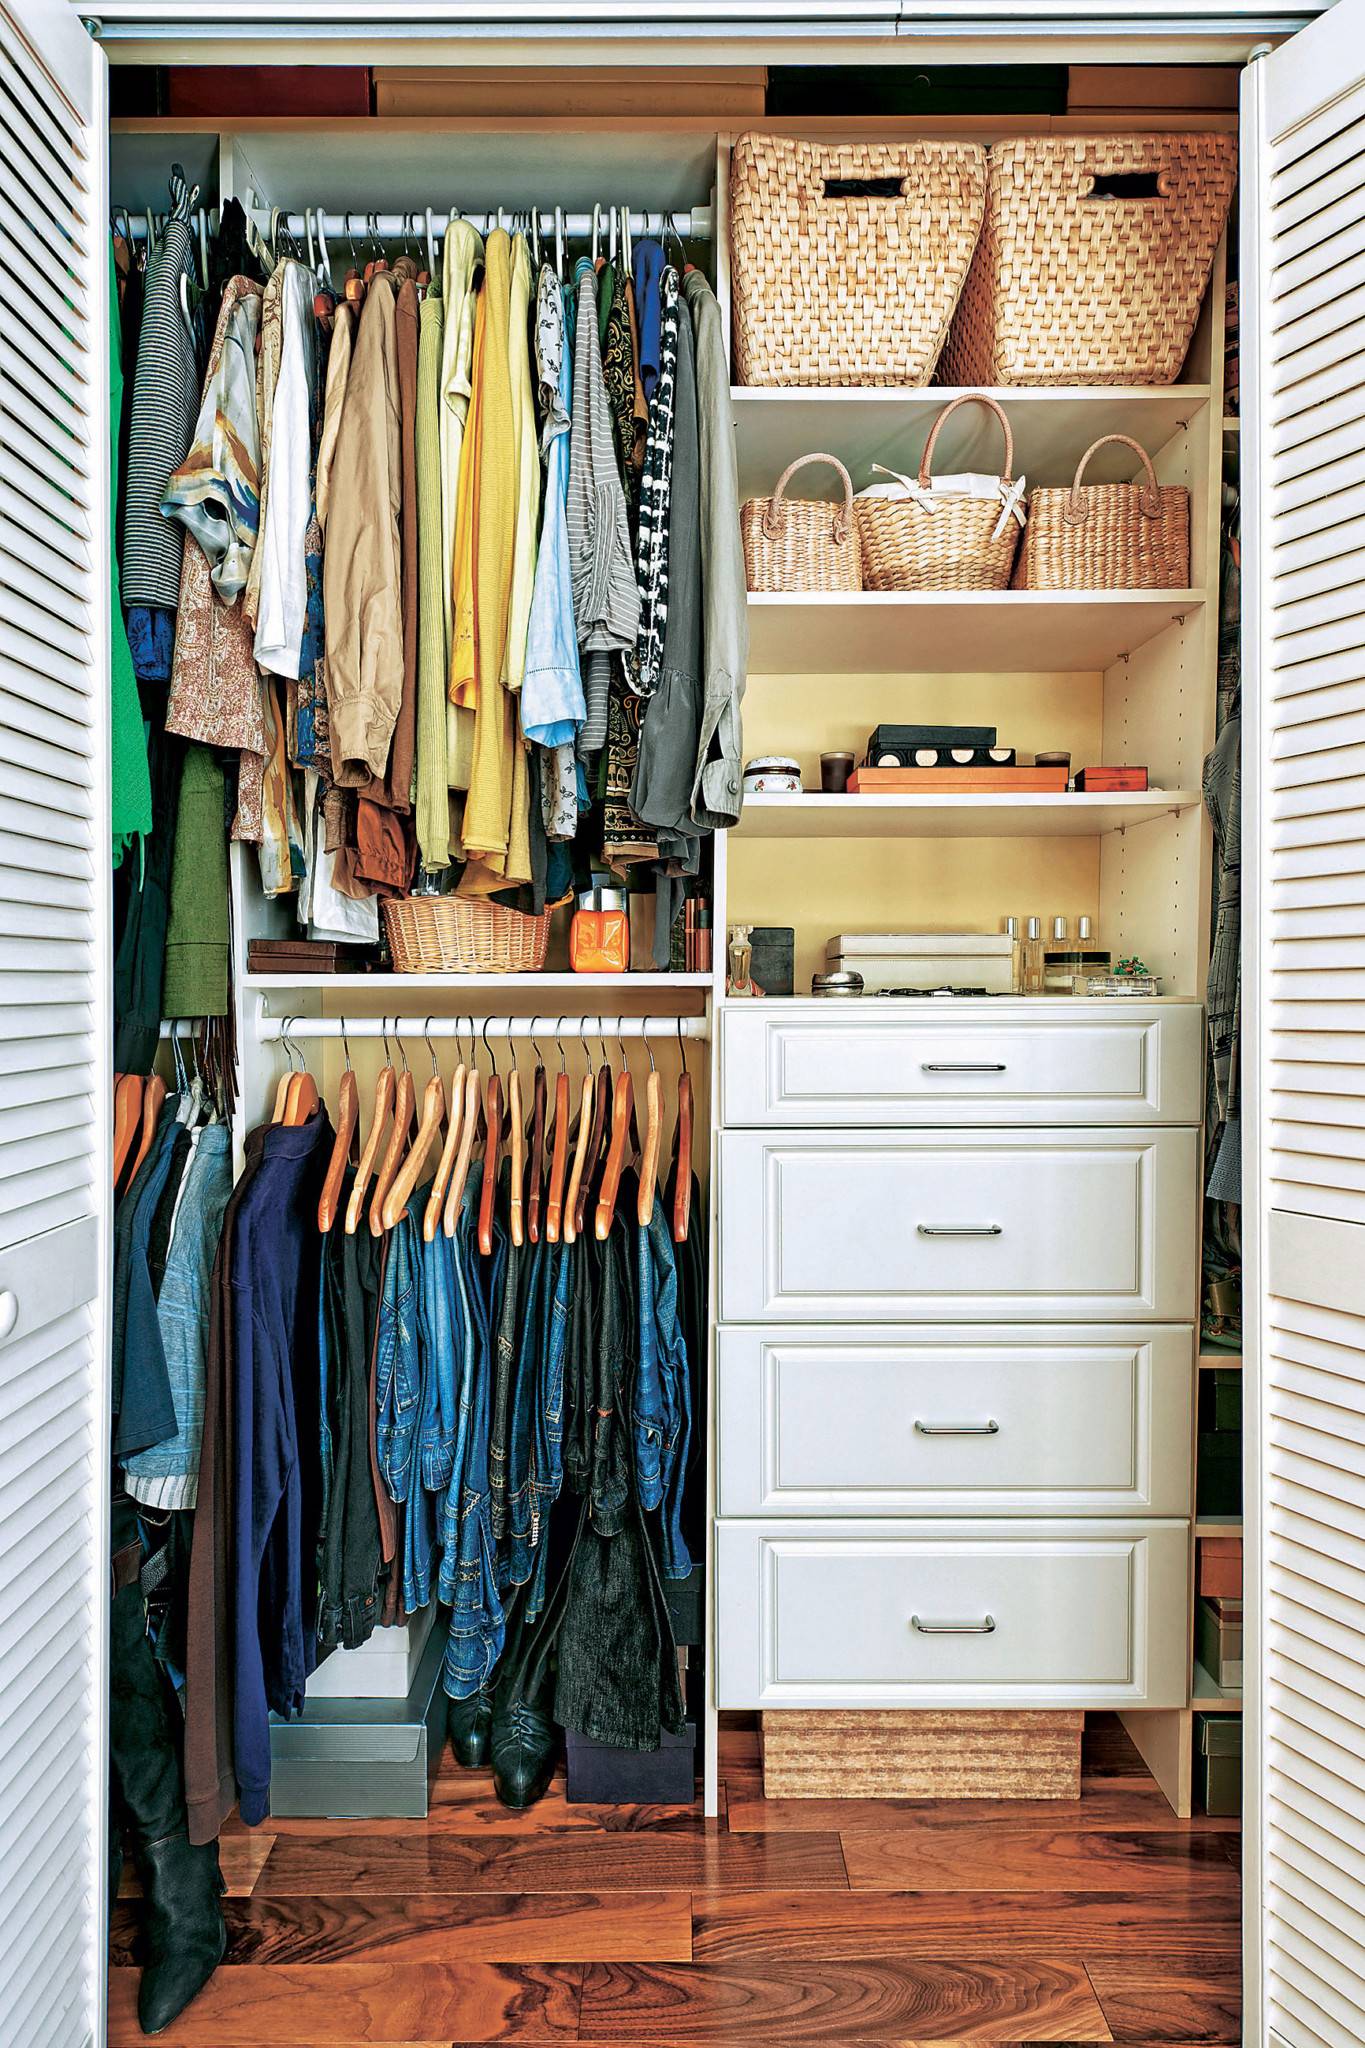 How To Organize Your Closet With Wire Drawers Under $100